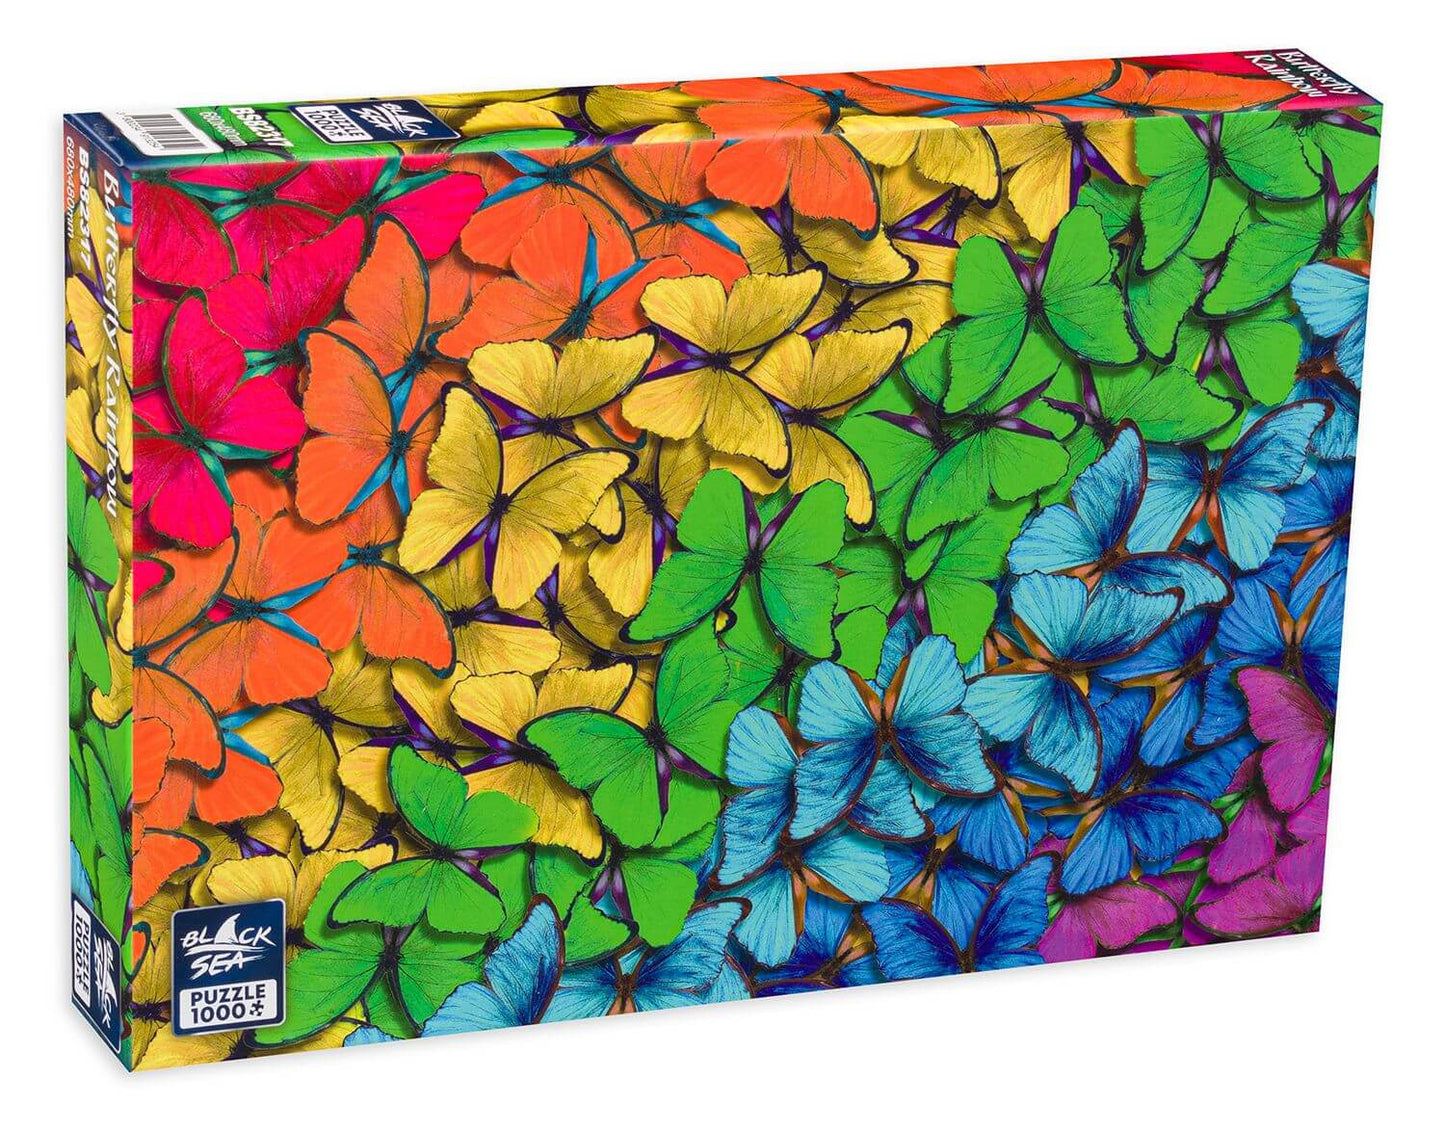 Puzzle Black Sea 1000 pieces - Butterfly Rainbow